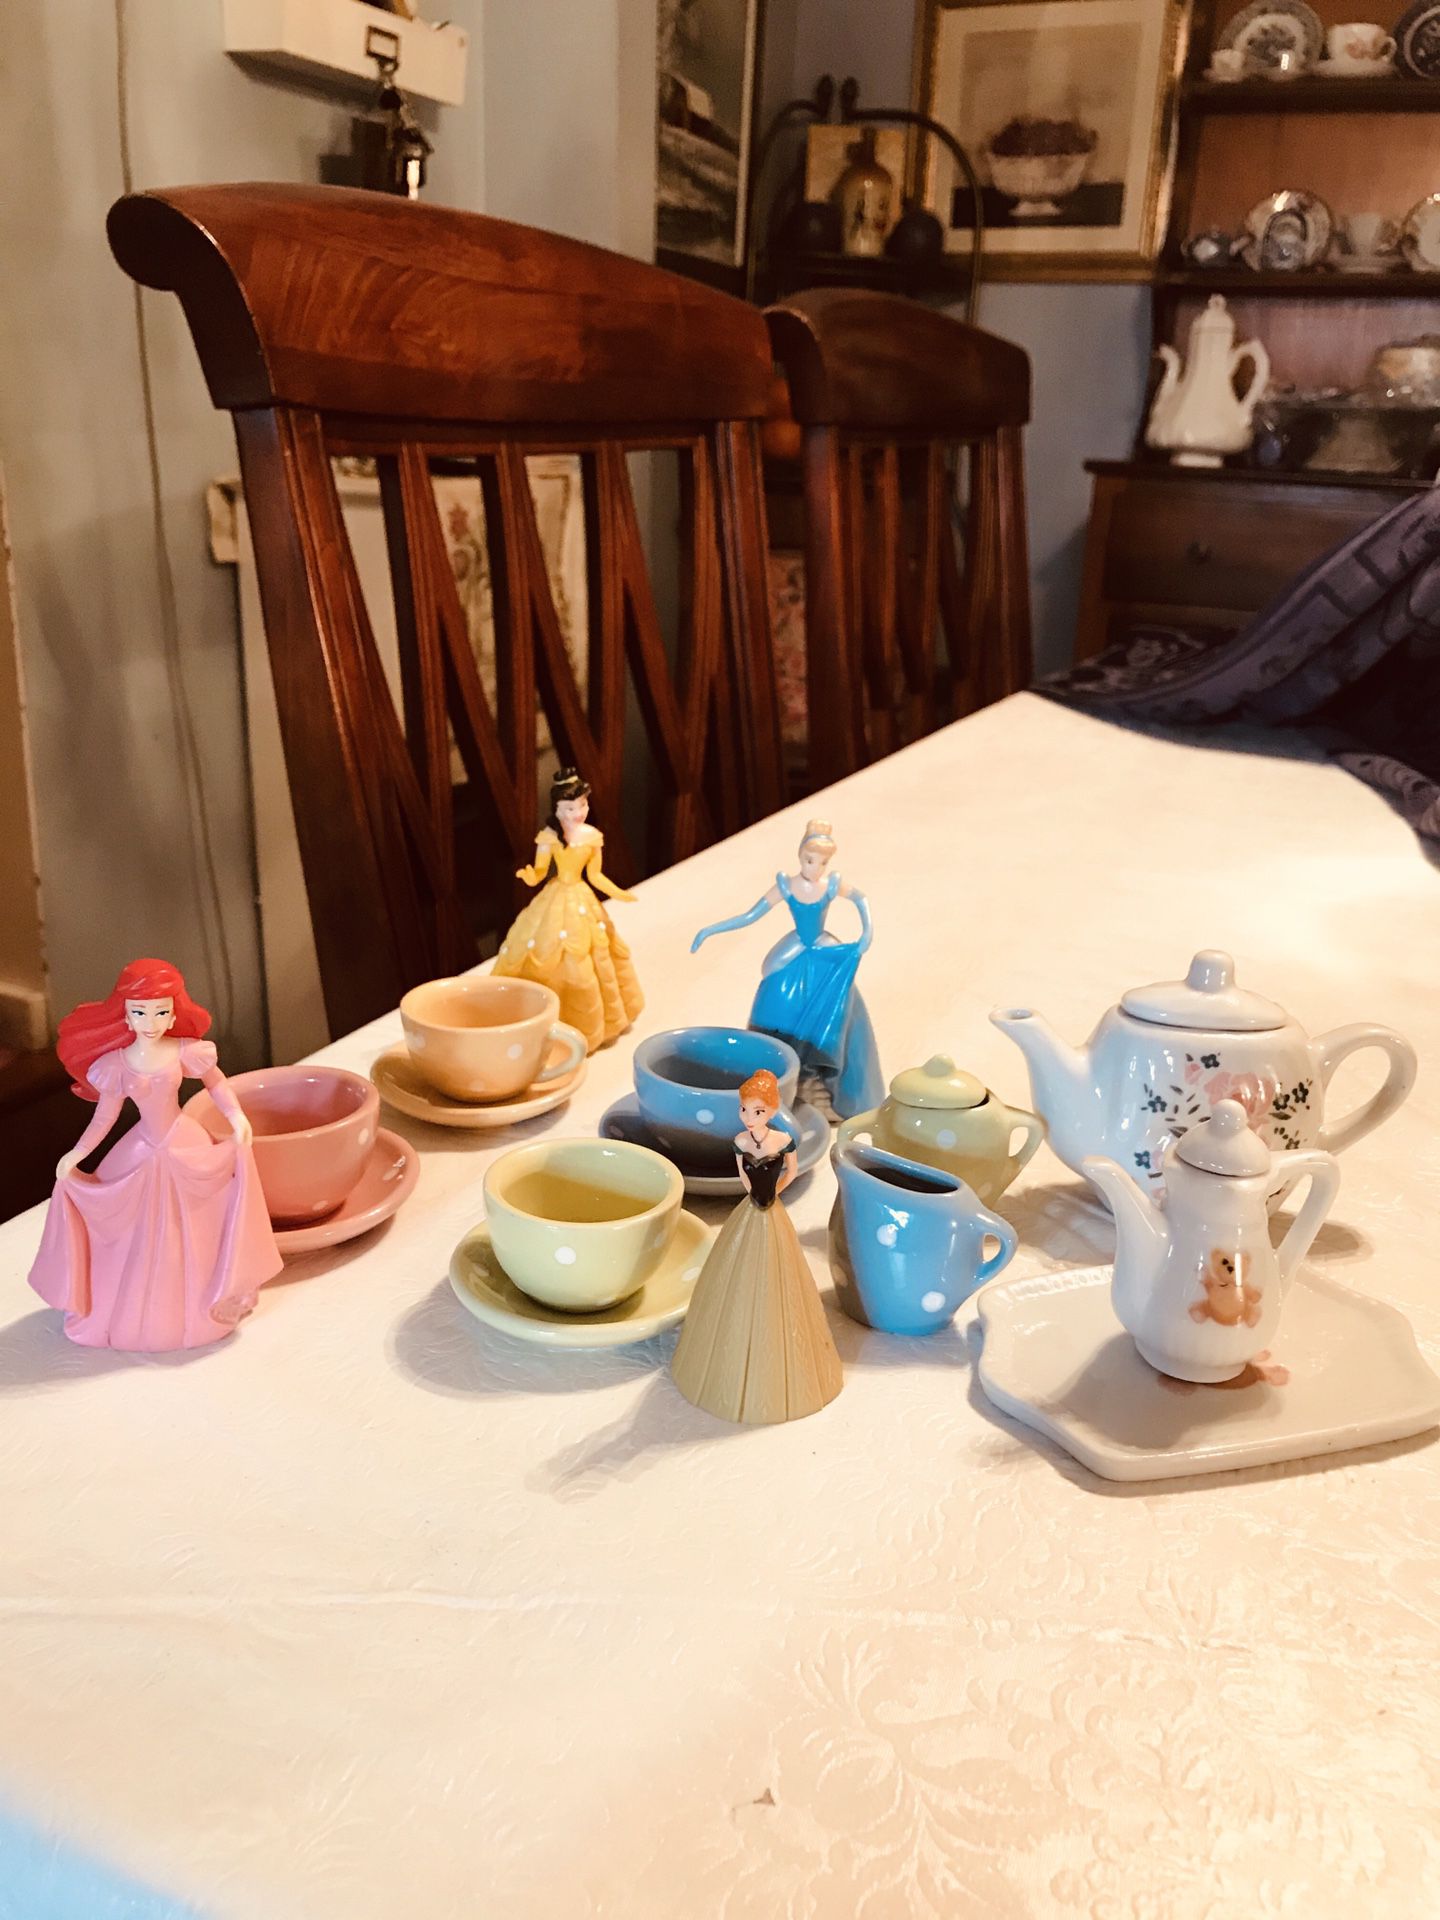 Cute little Tea Set, the original teapot is missing, so I compensated by adding Little Disney dolls and another teapot